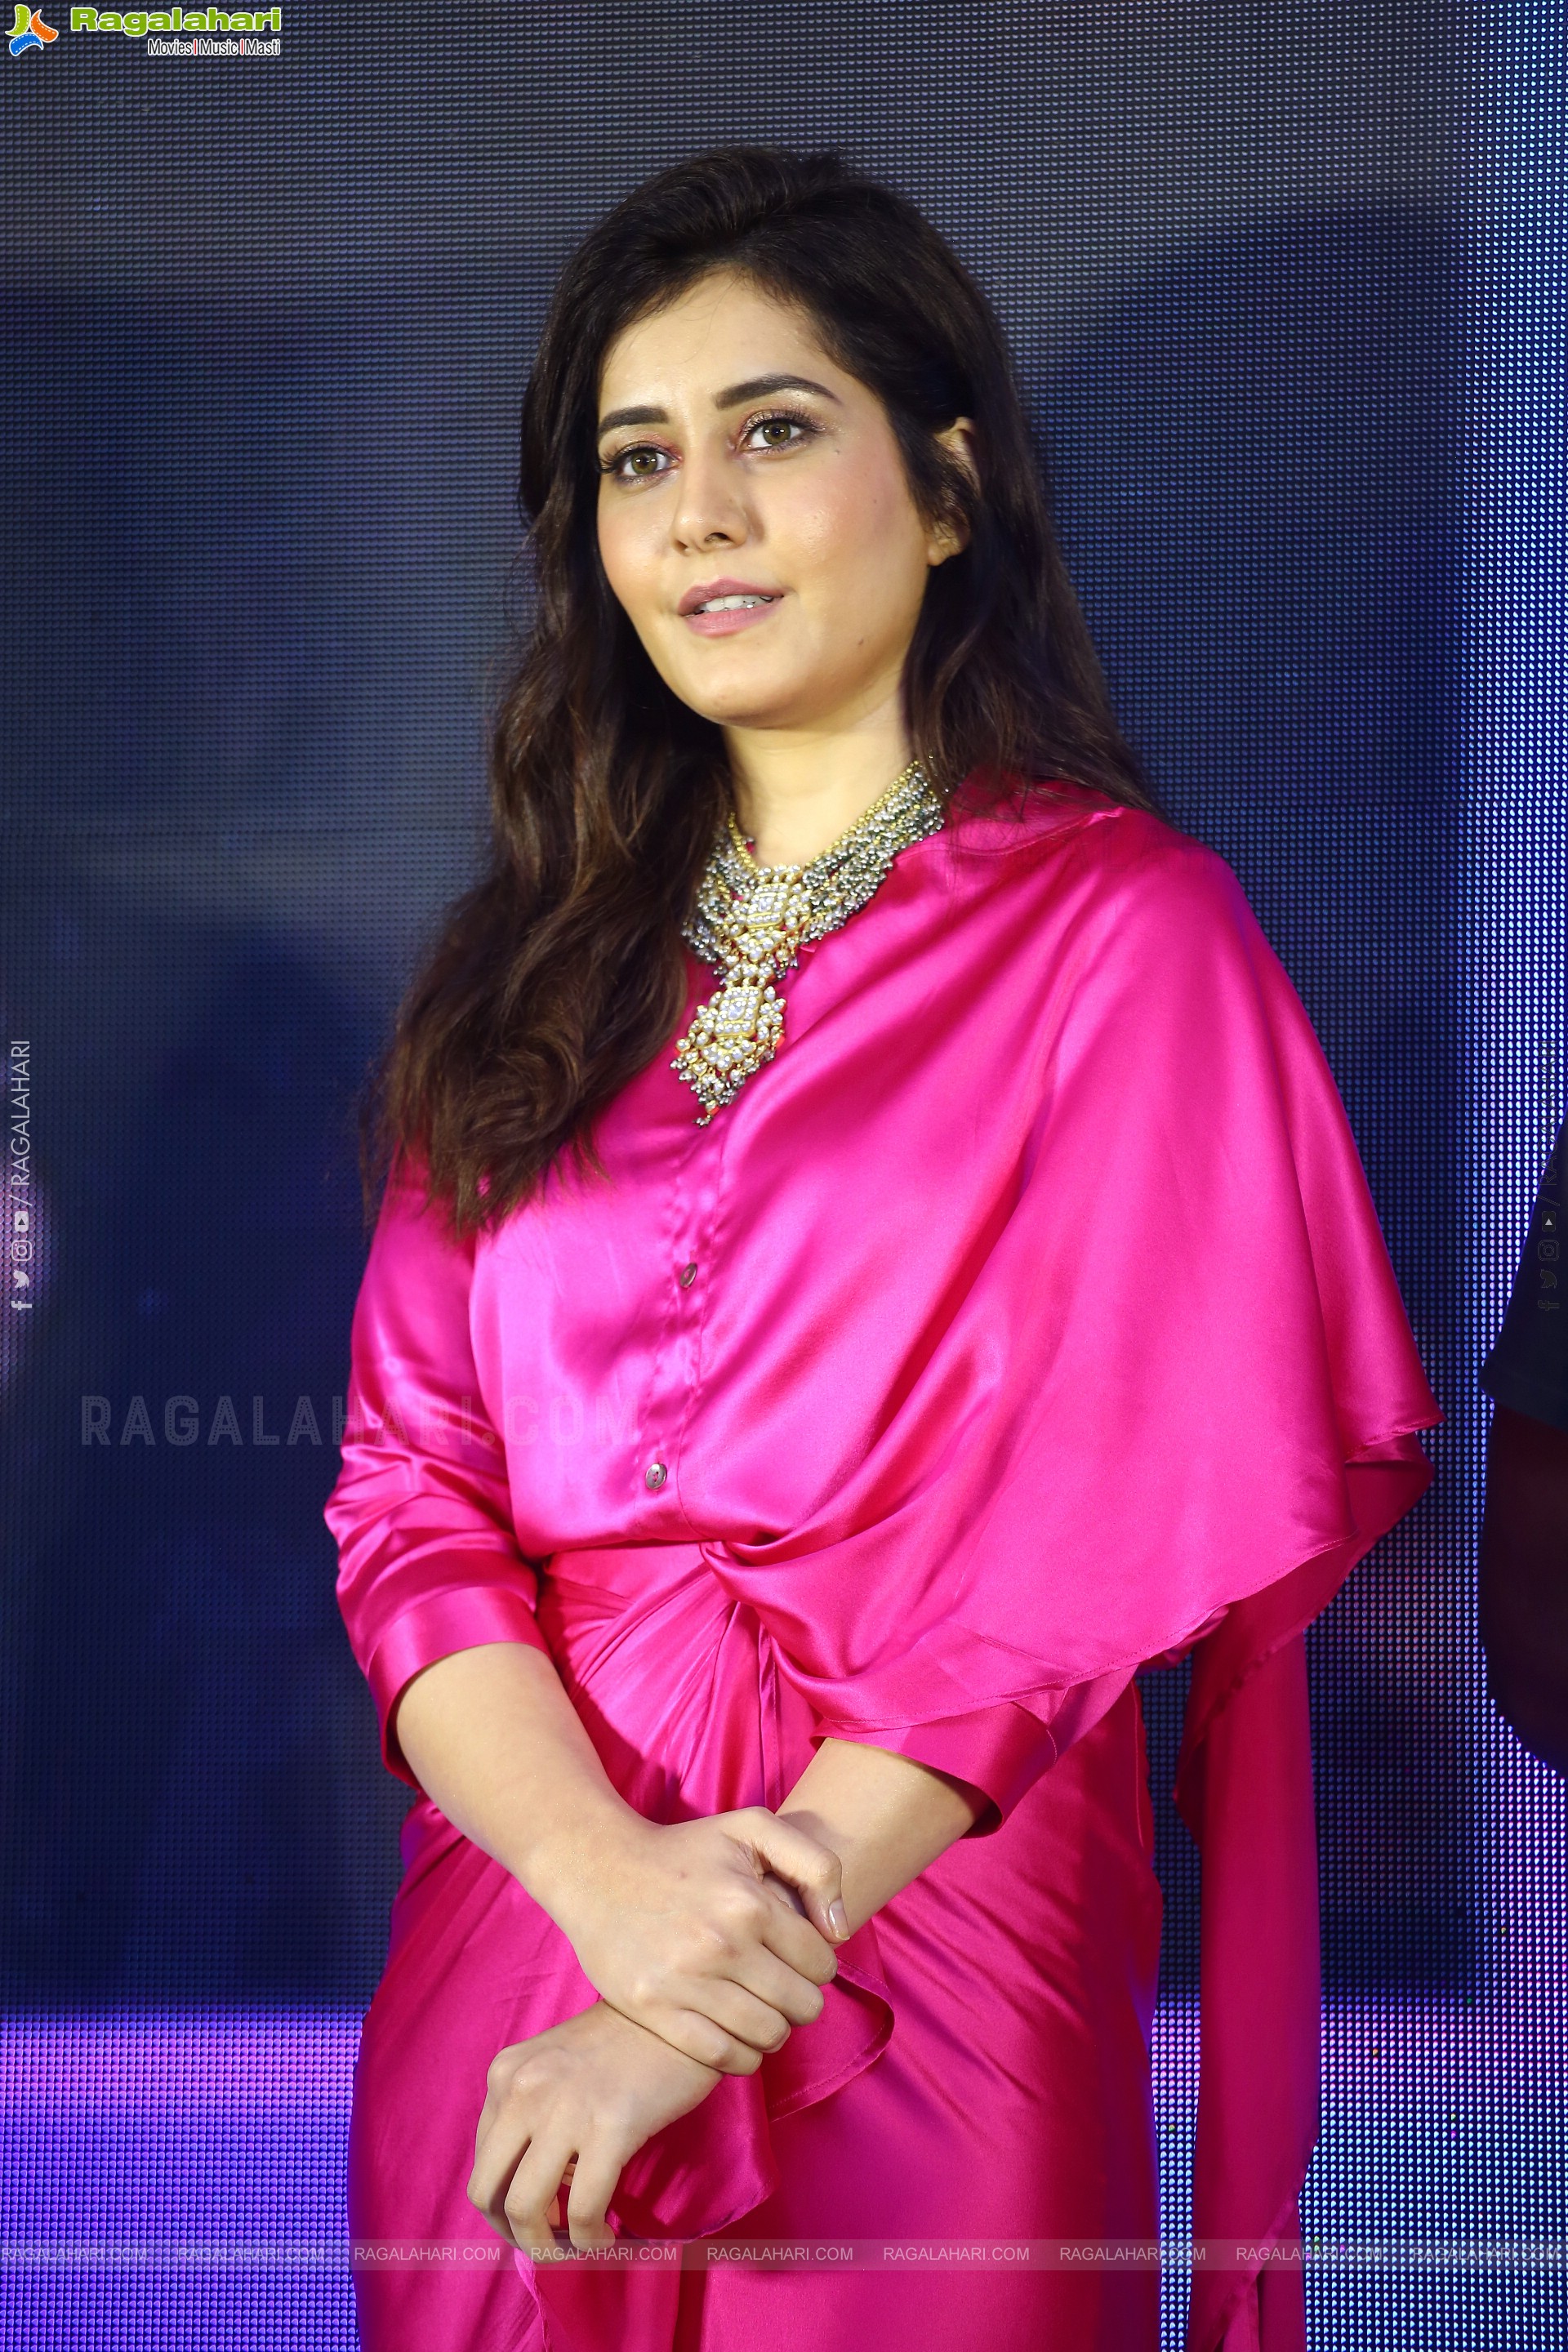 Raashi Khanna at Thank You Movie Trailer Launch, HD Photo Gallery